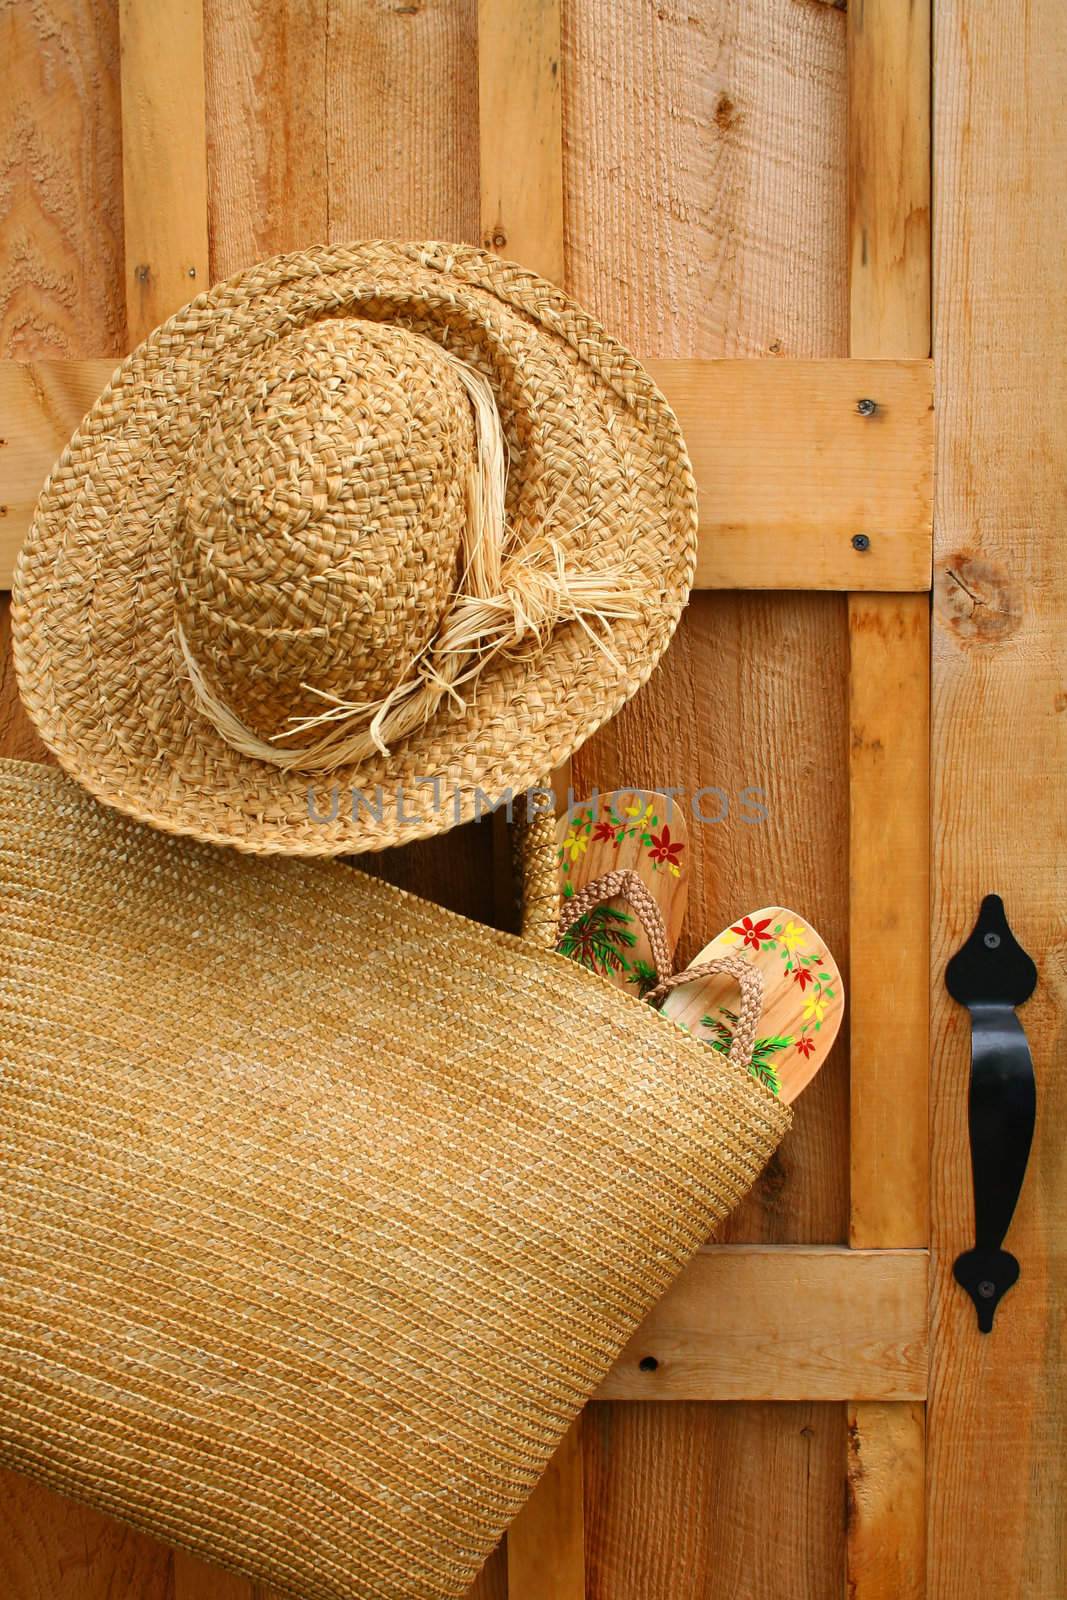 Pair of sandals hanging out of wicker purse with sun hat